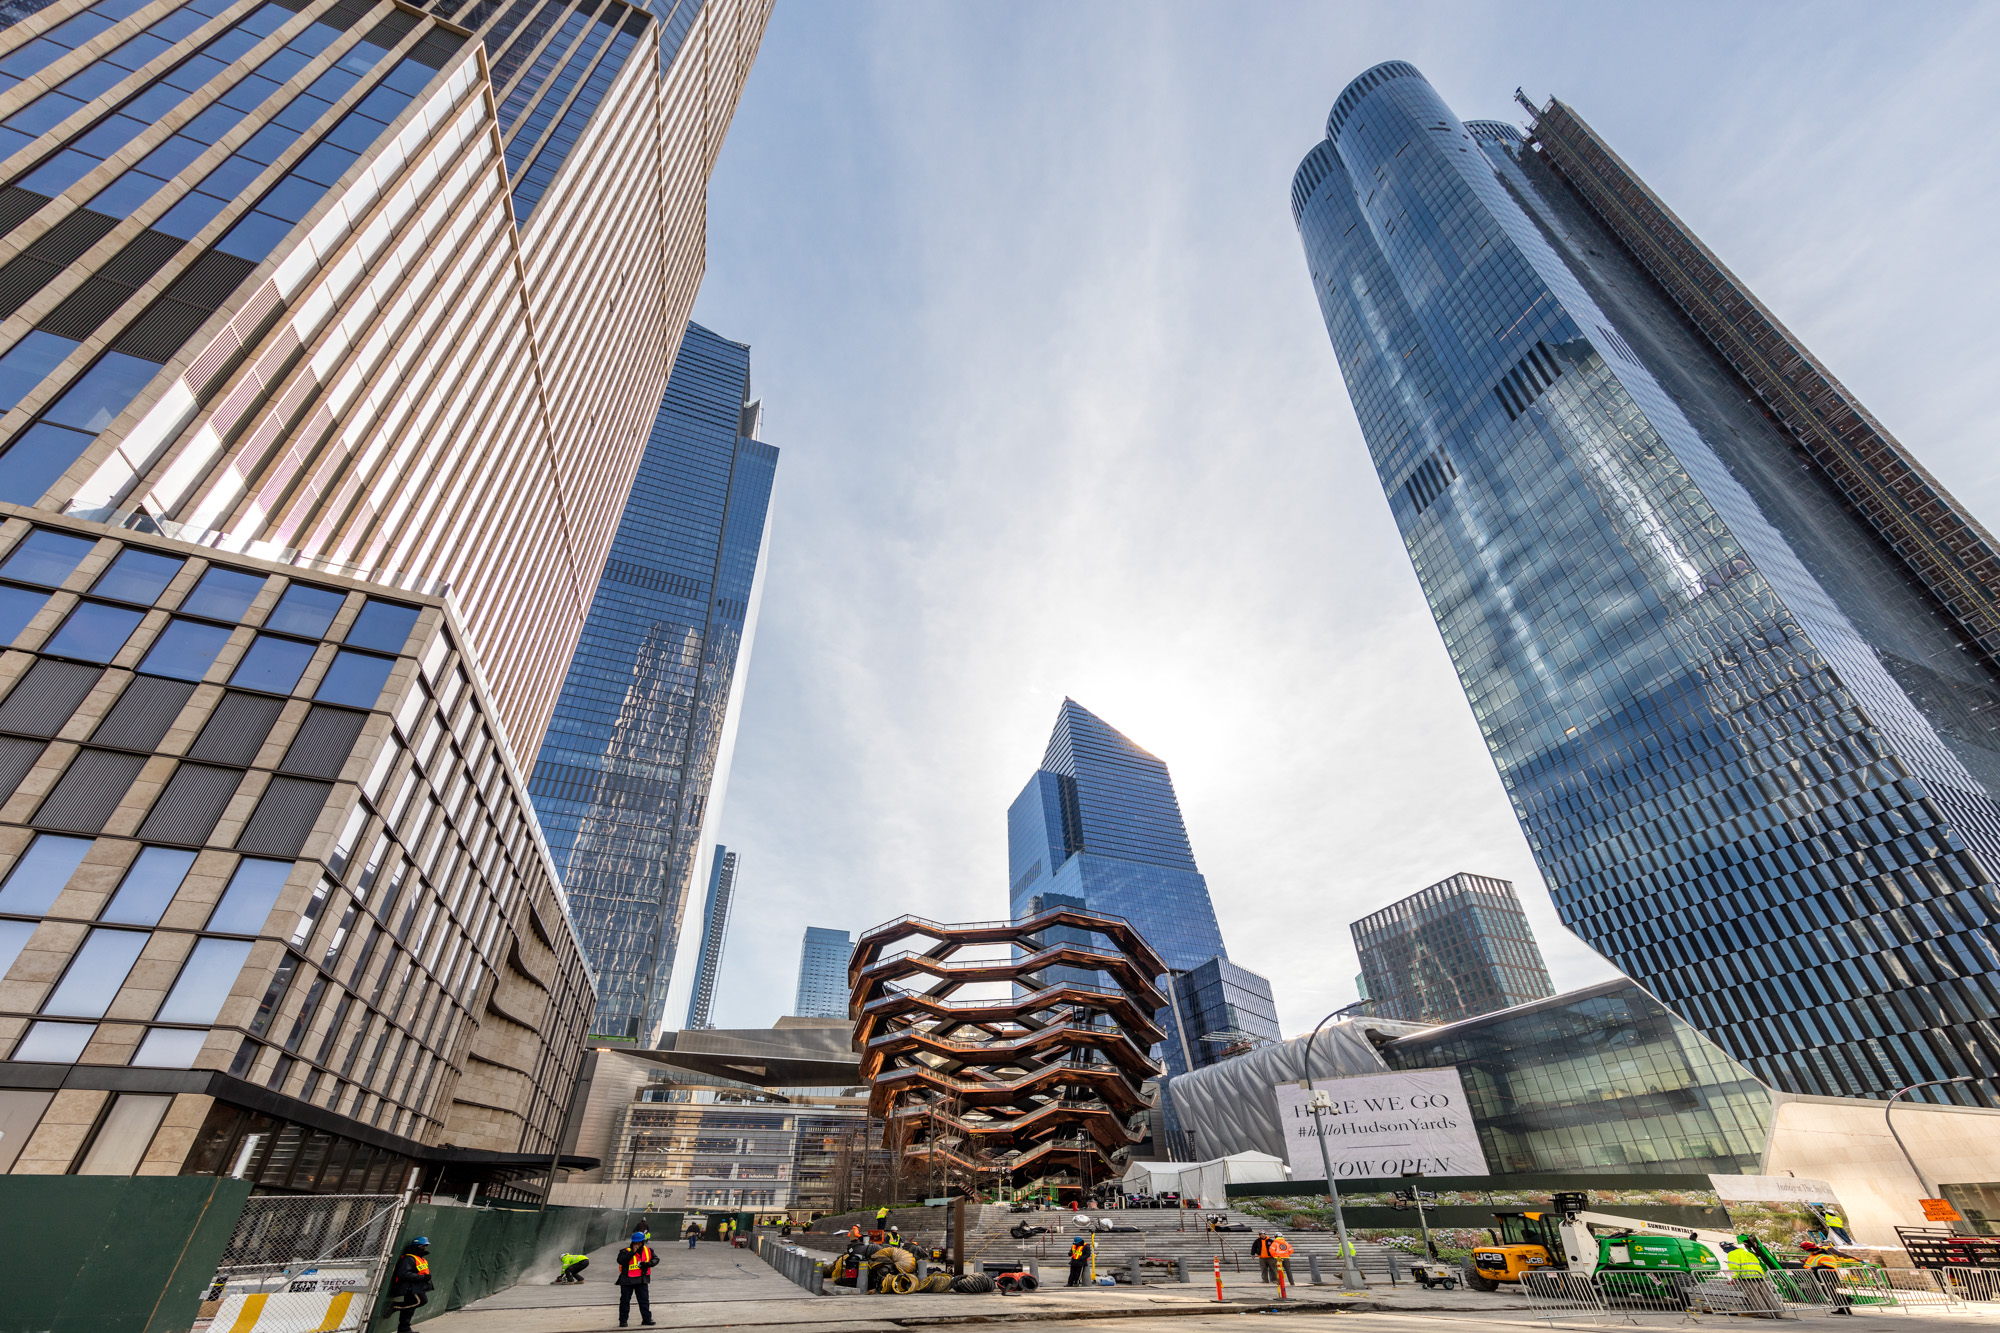 Several tall buildings with glass facades surround a landmark that is shaped like a beehive and made from steel. 